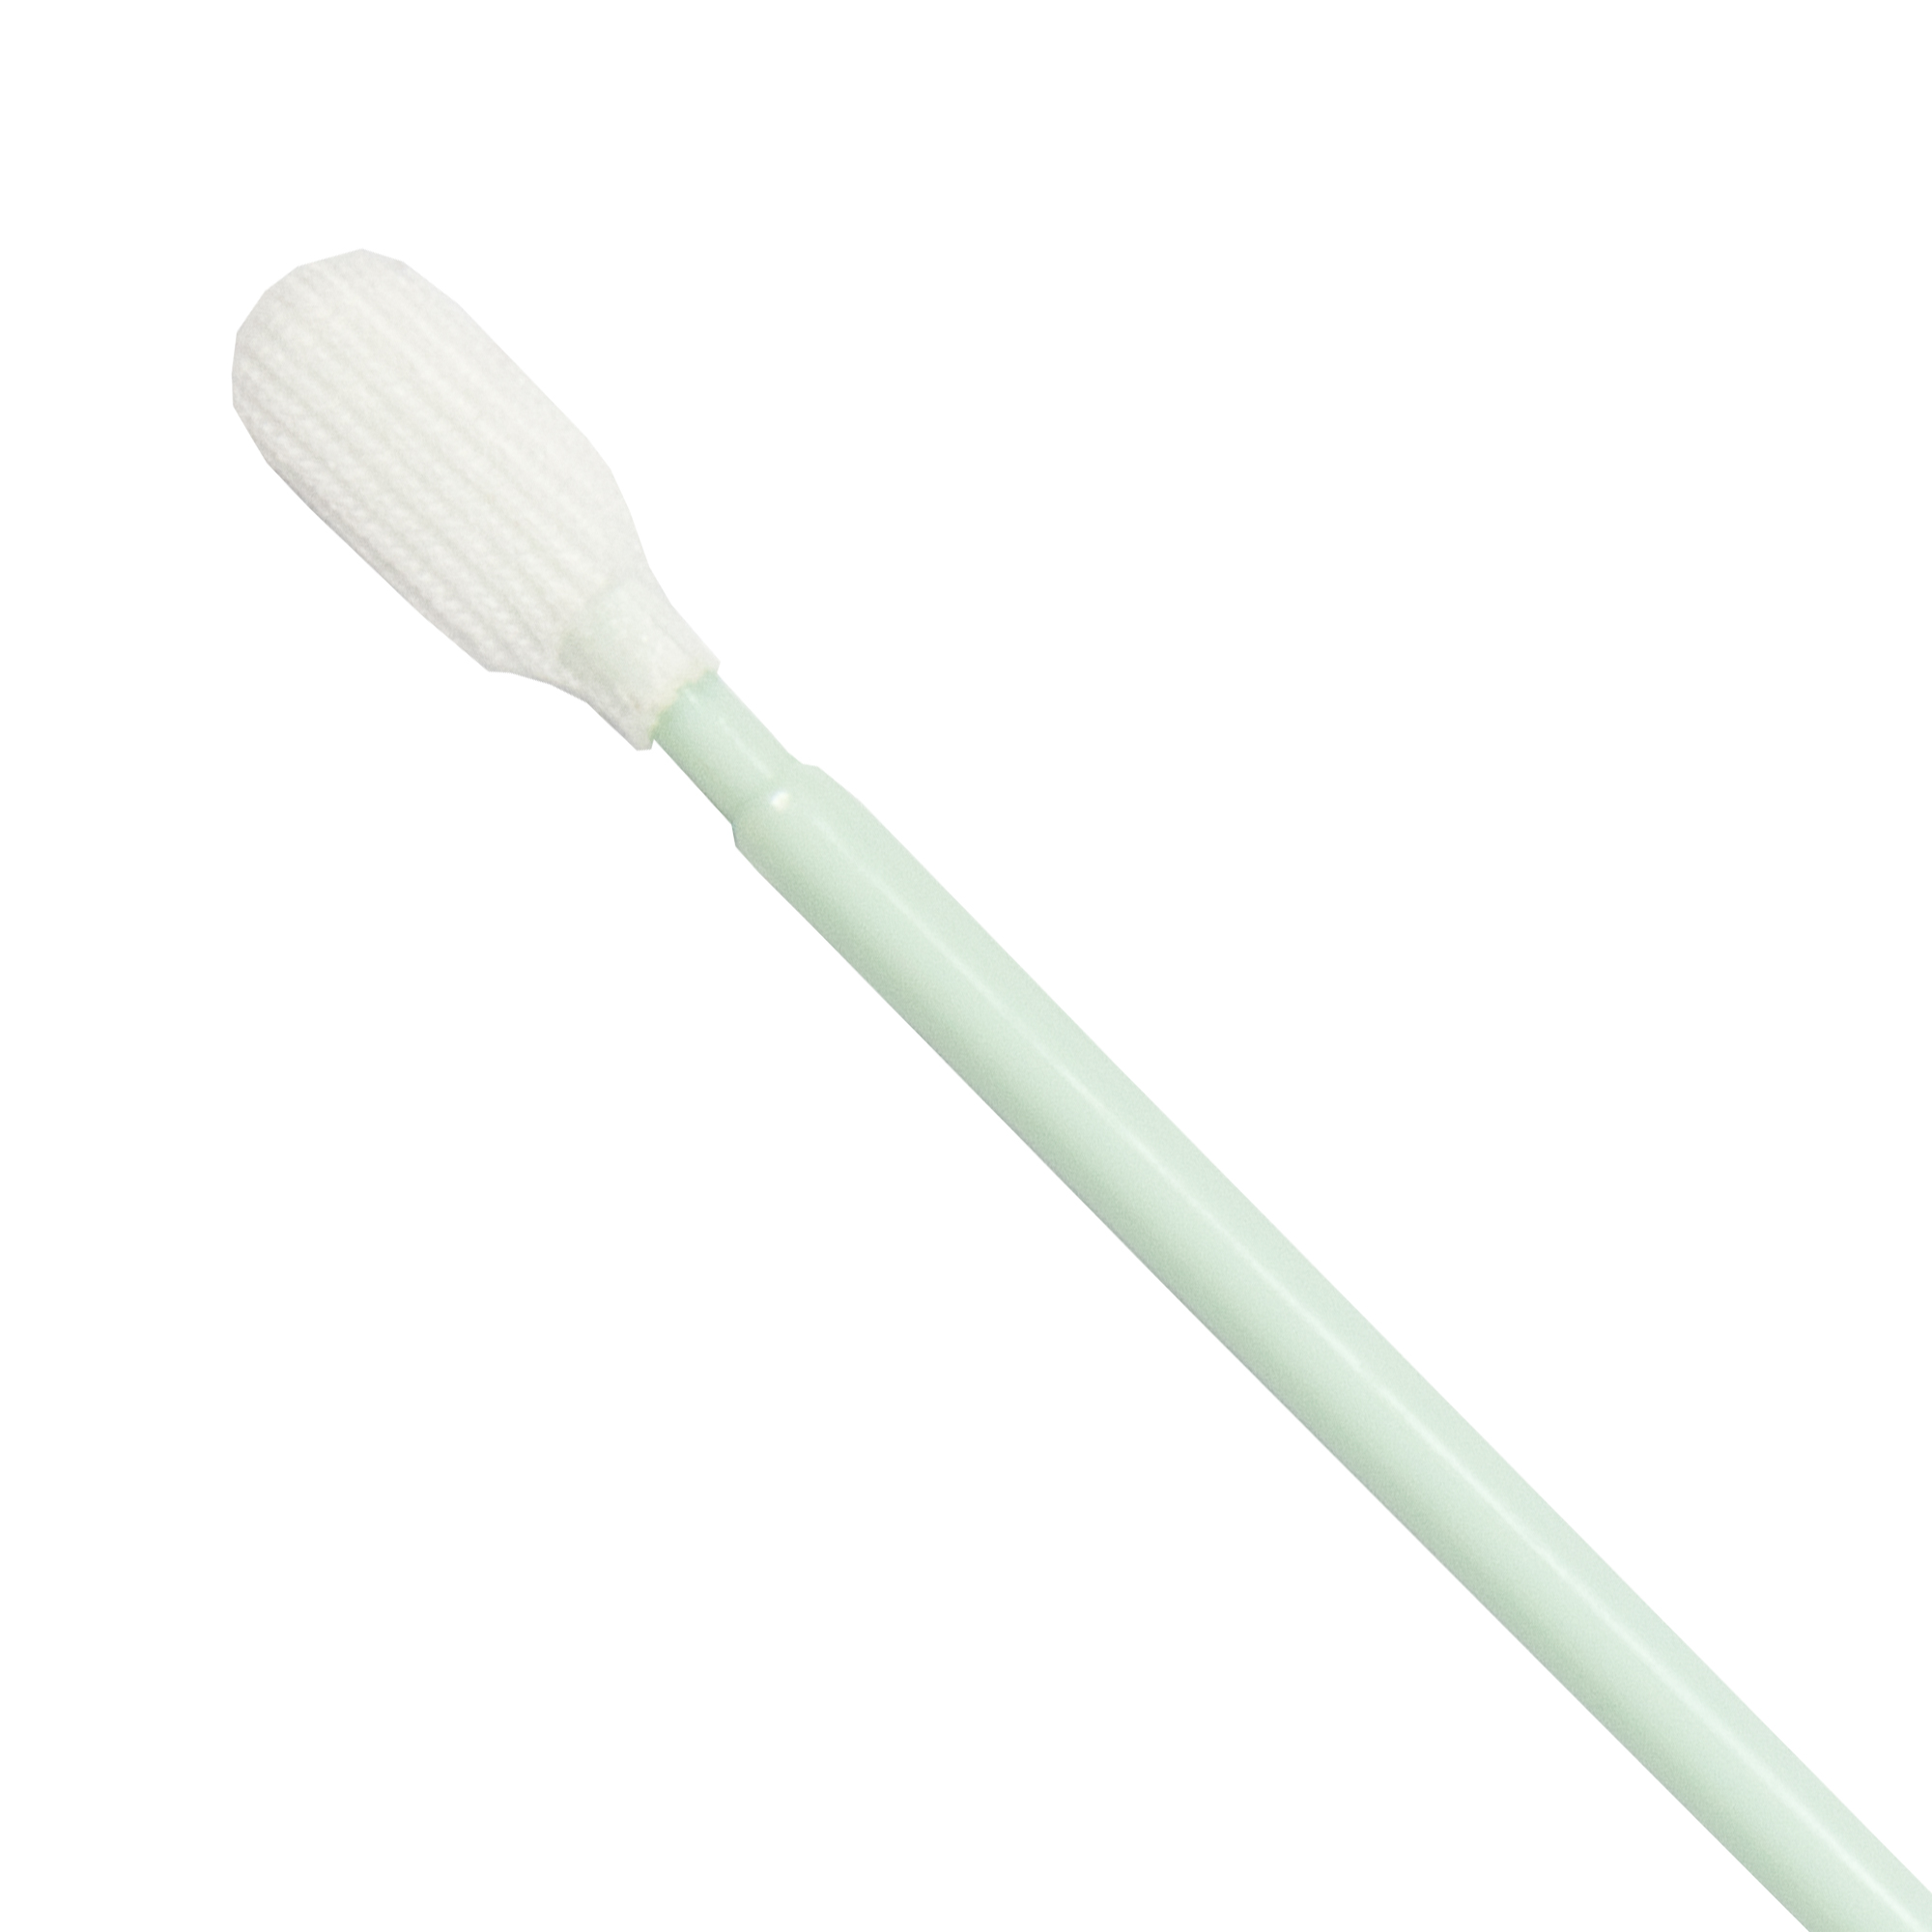 Cleaning Stick/Swab PS3910